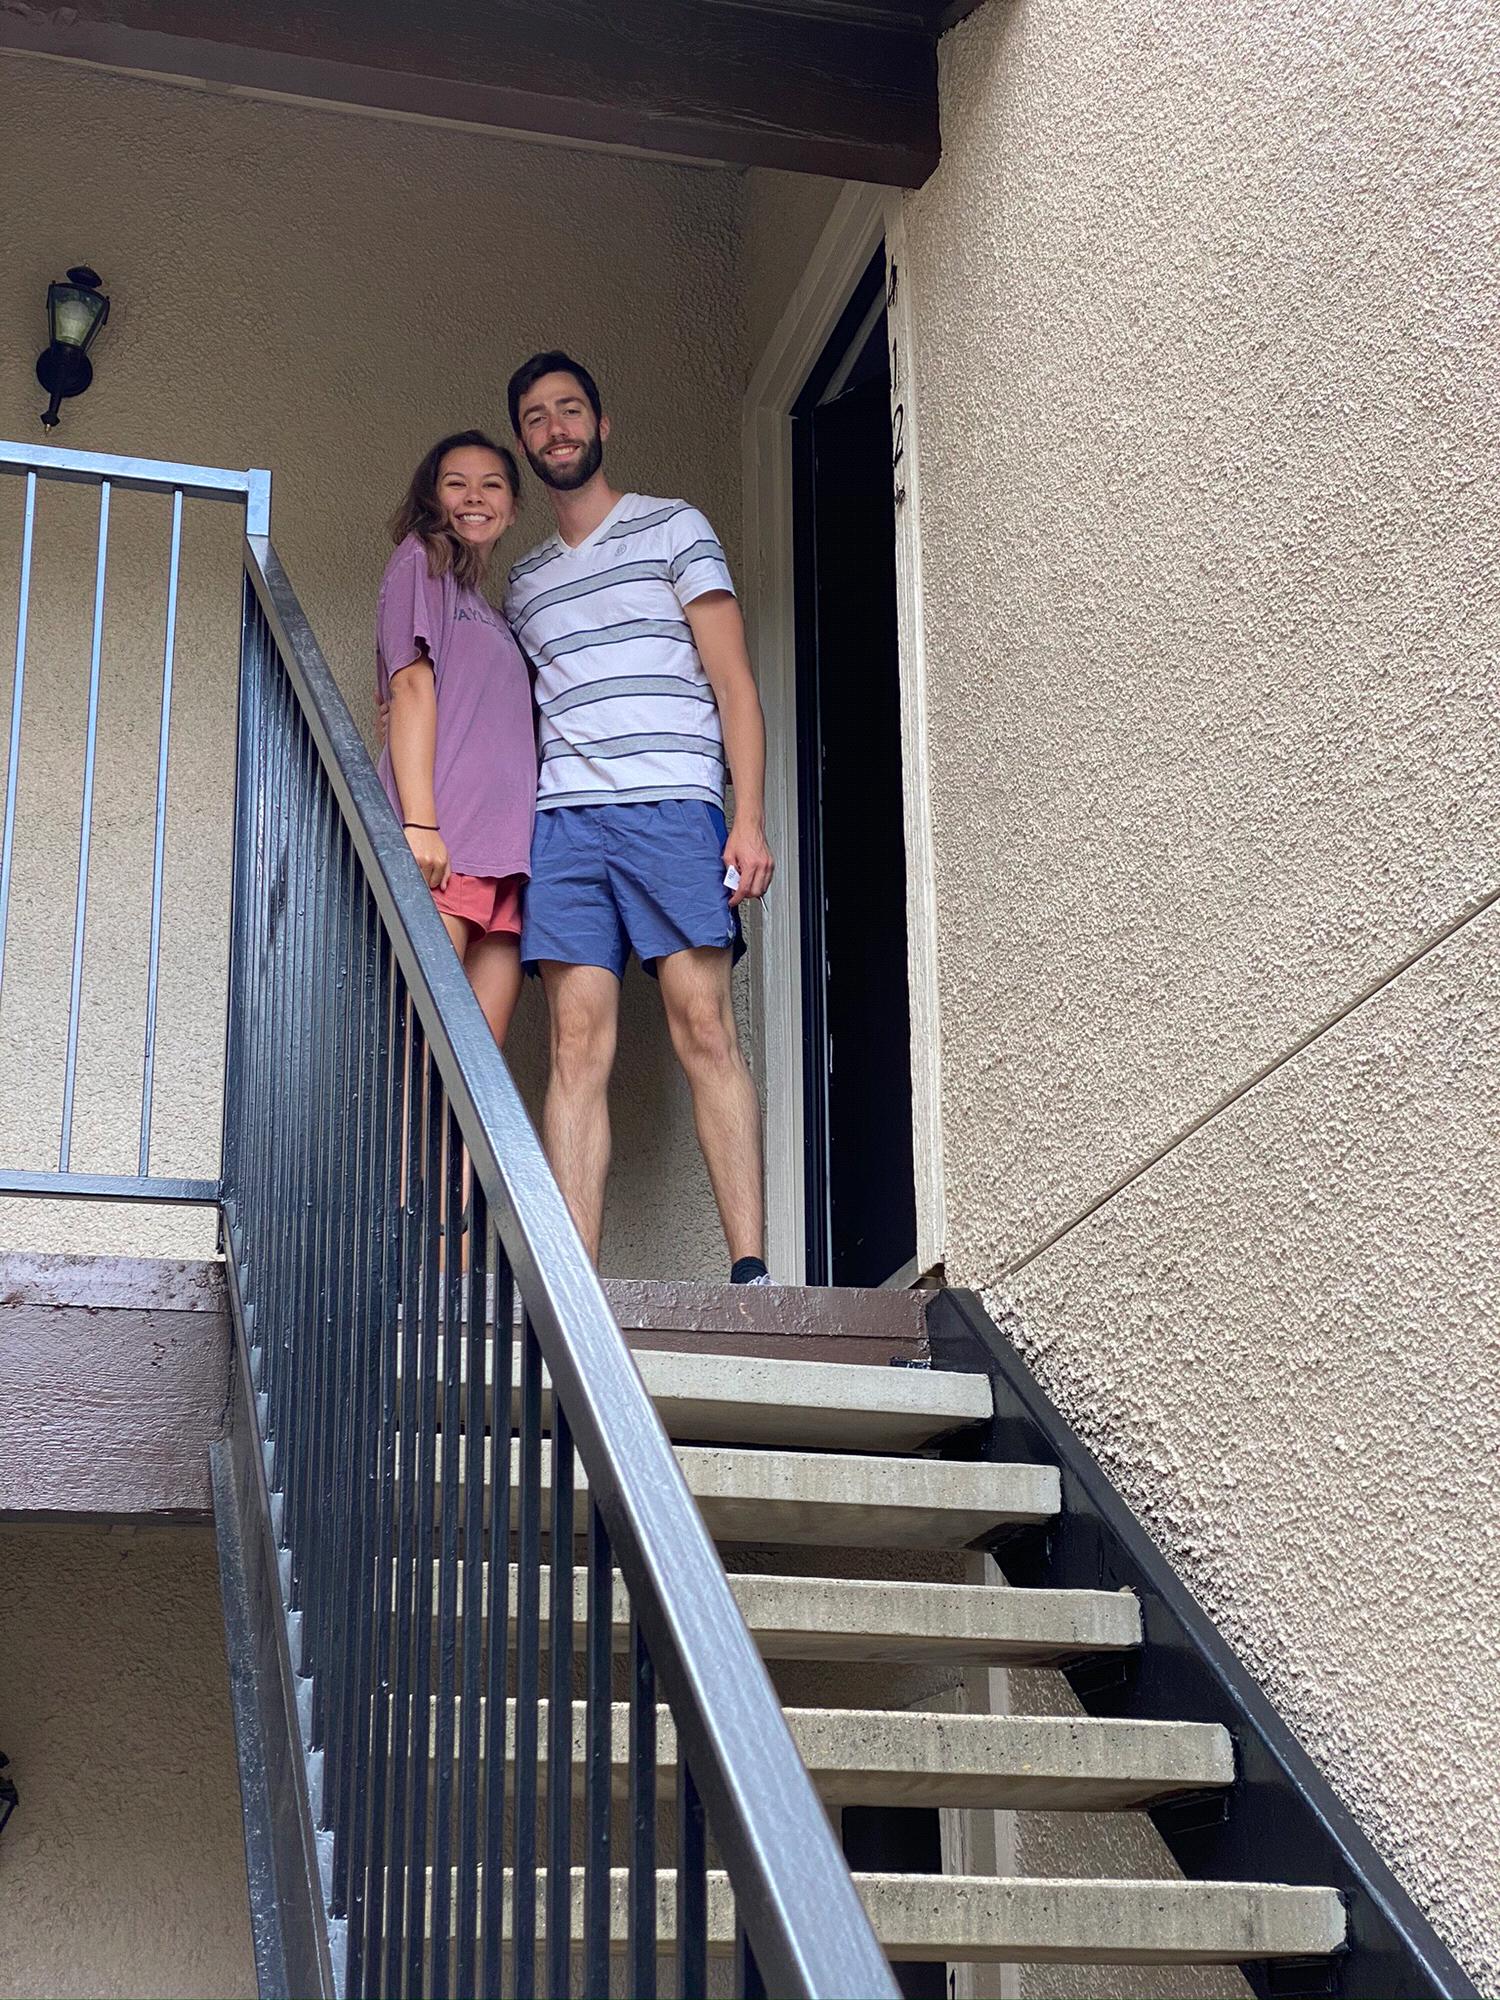 Moved into our first apartment in DFW on June 1st, 2020!